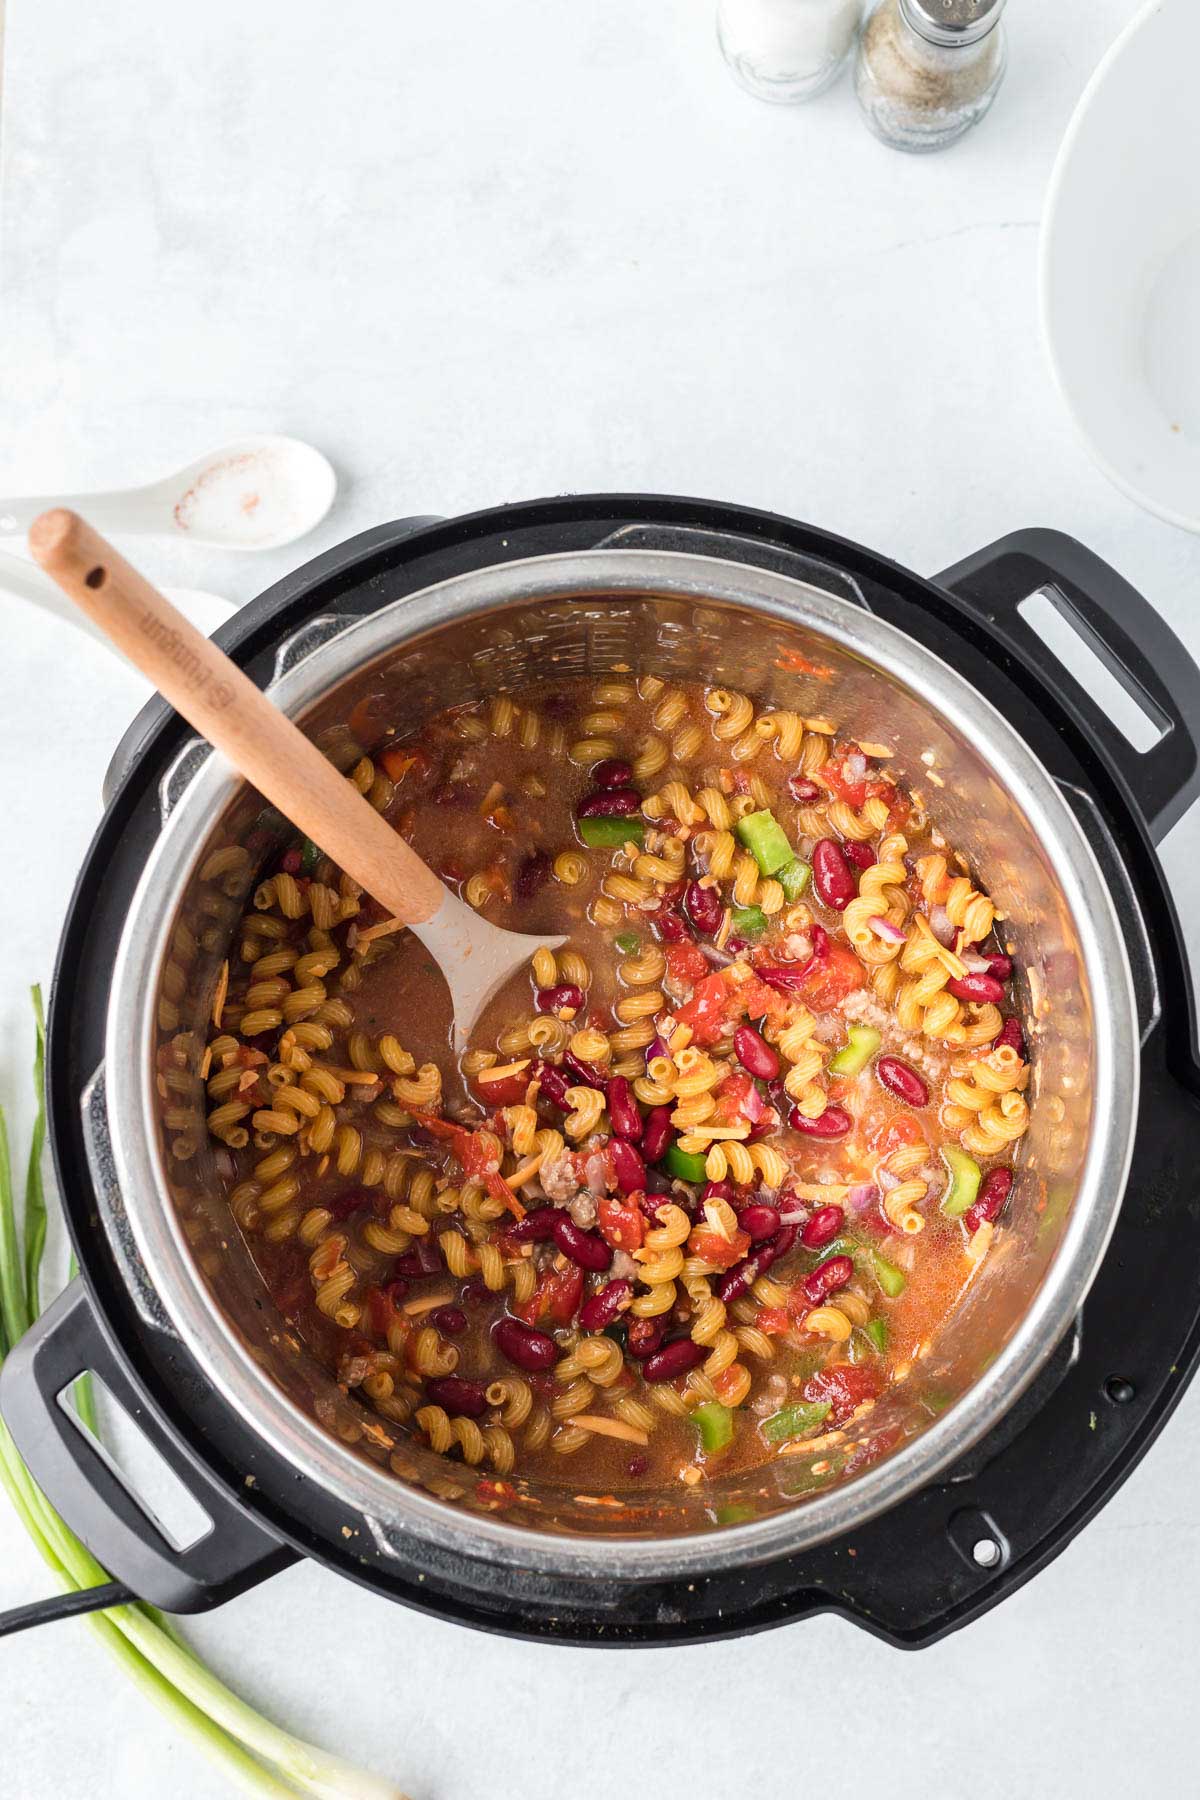 Chili mac recipe being made in an instant pot.